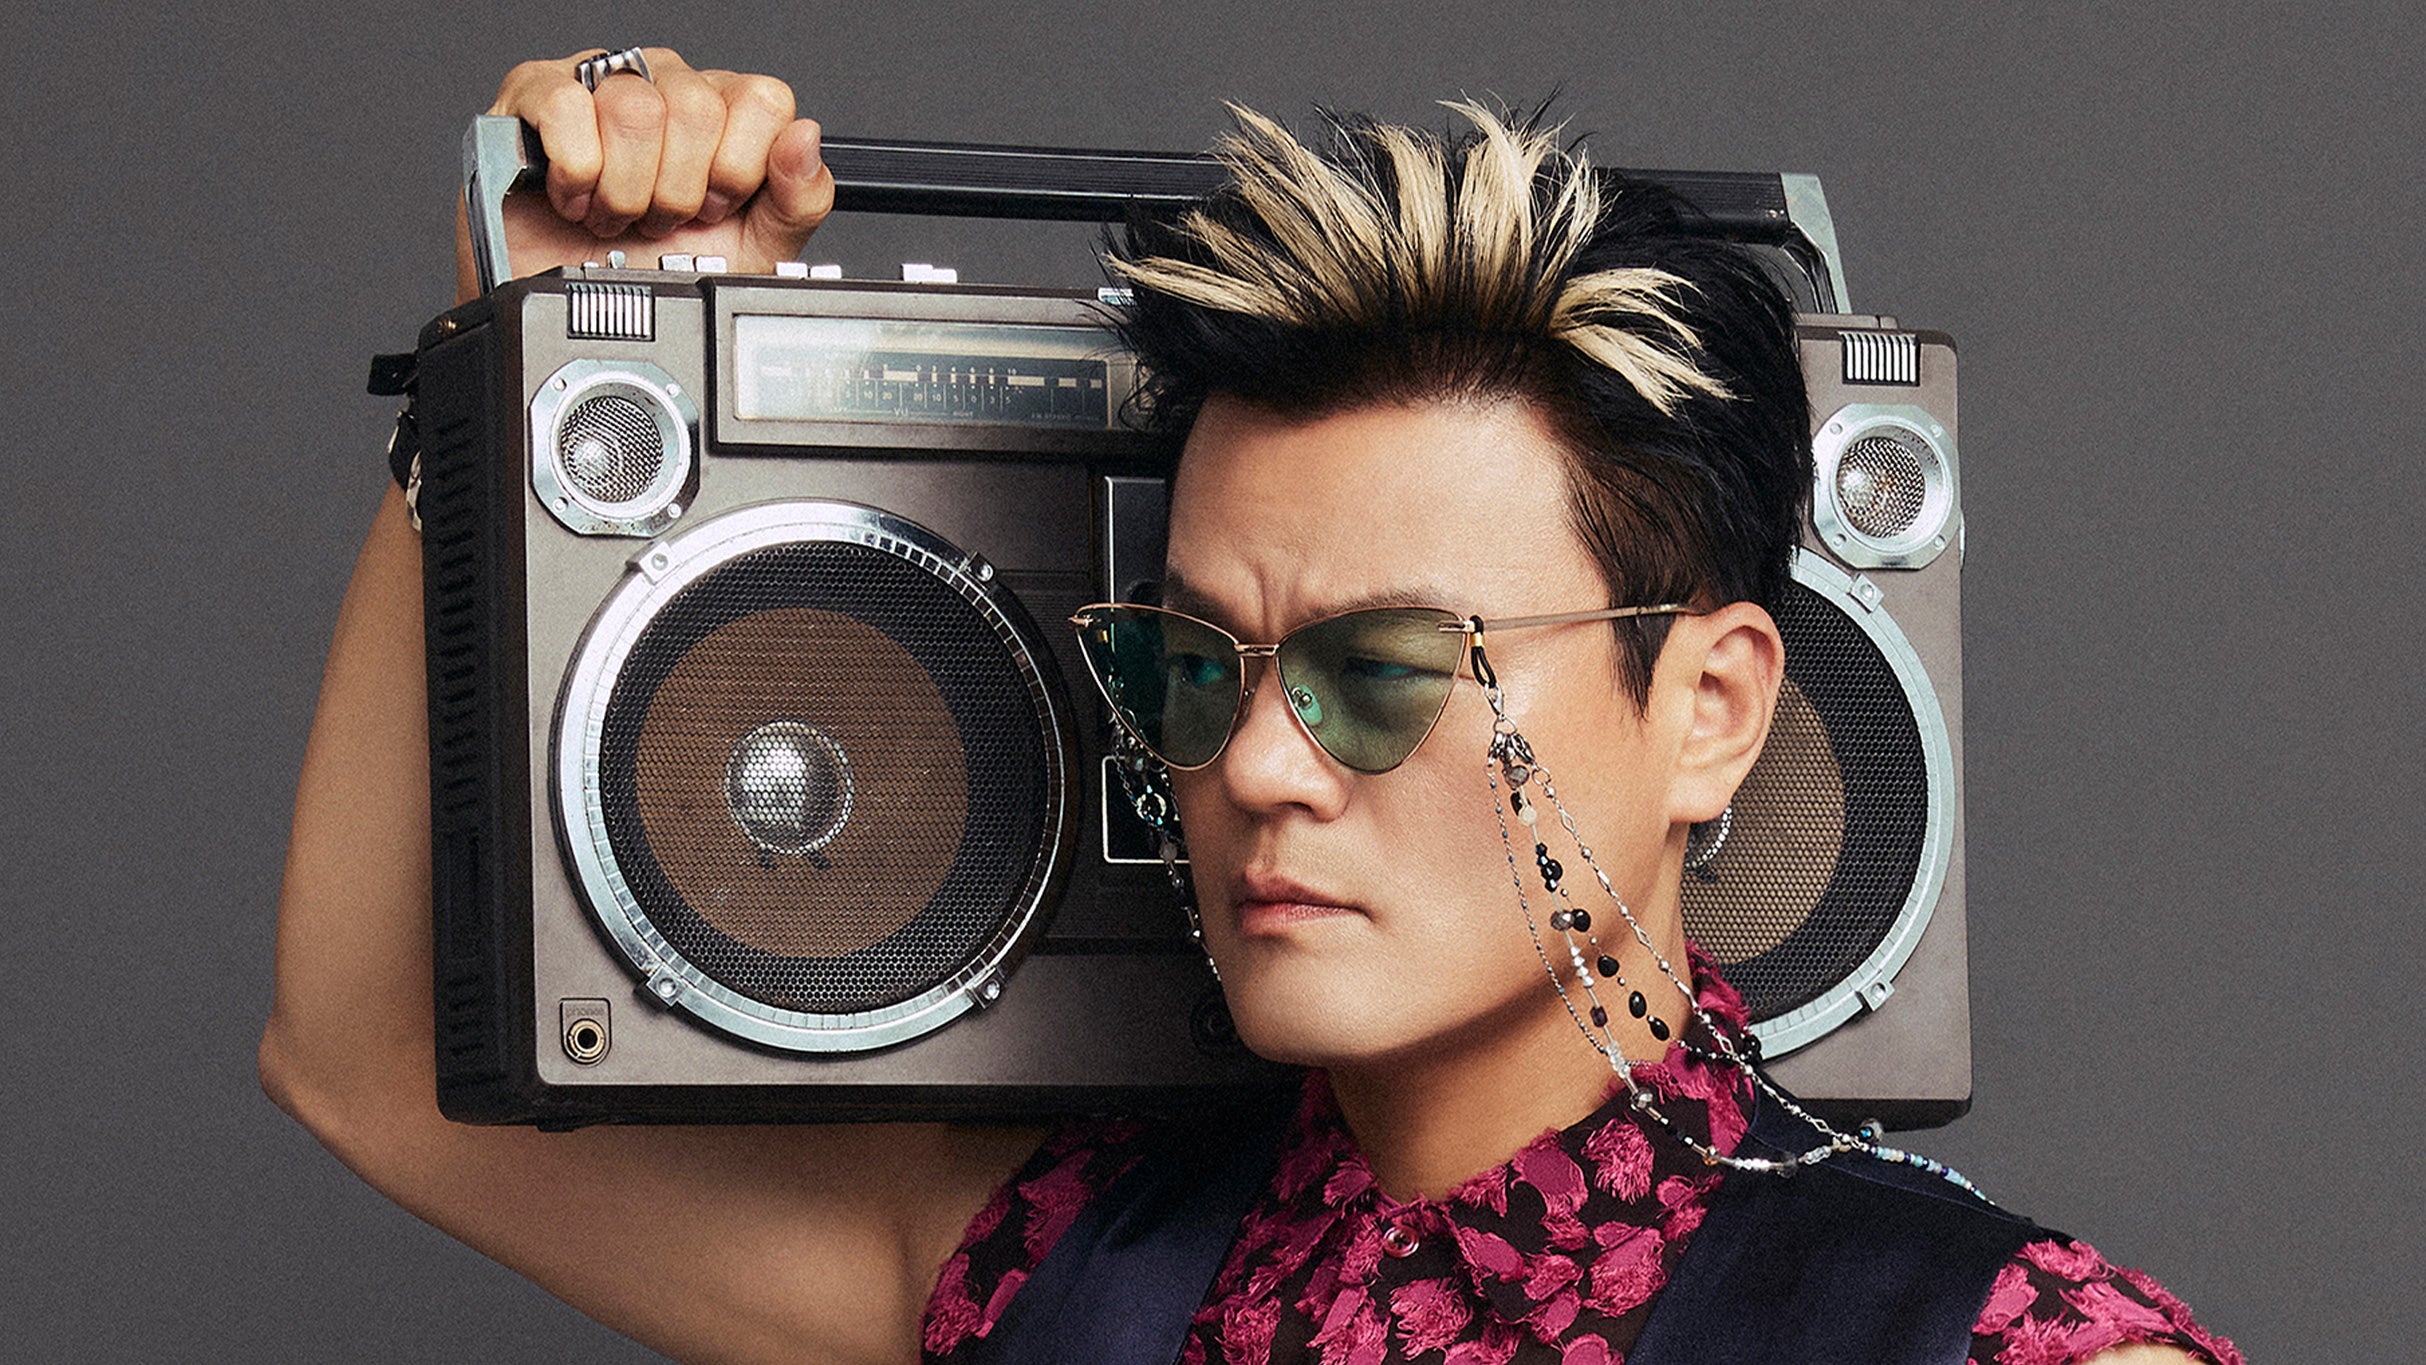 J.Y. Park Concert 'Groove Back' in New York in Brooklyn promo photo for VIP Package Onsale presale offer code